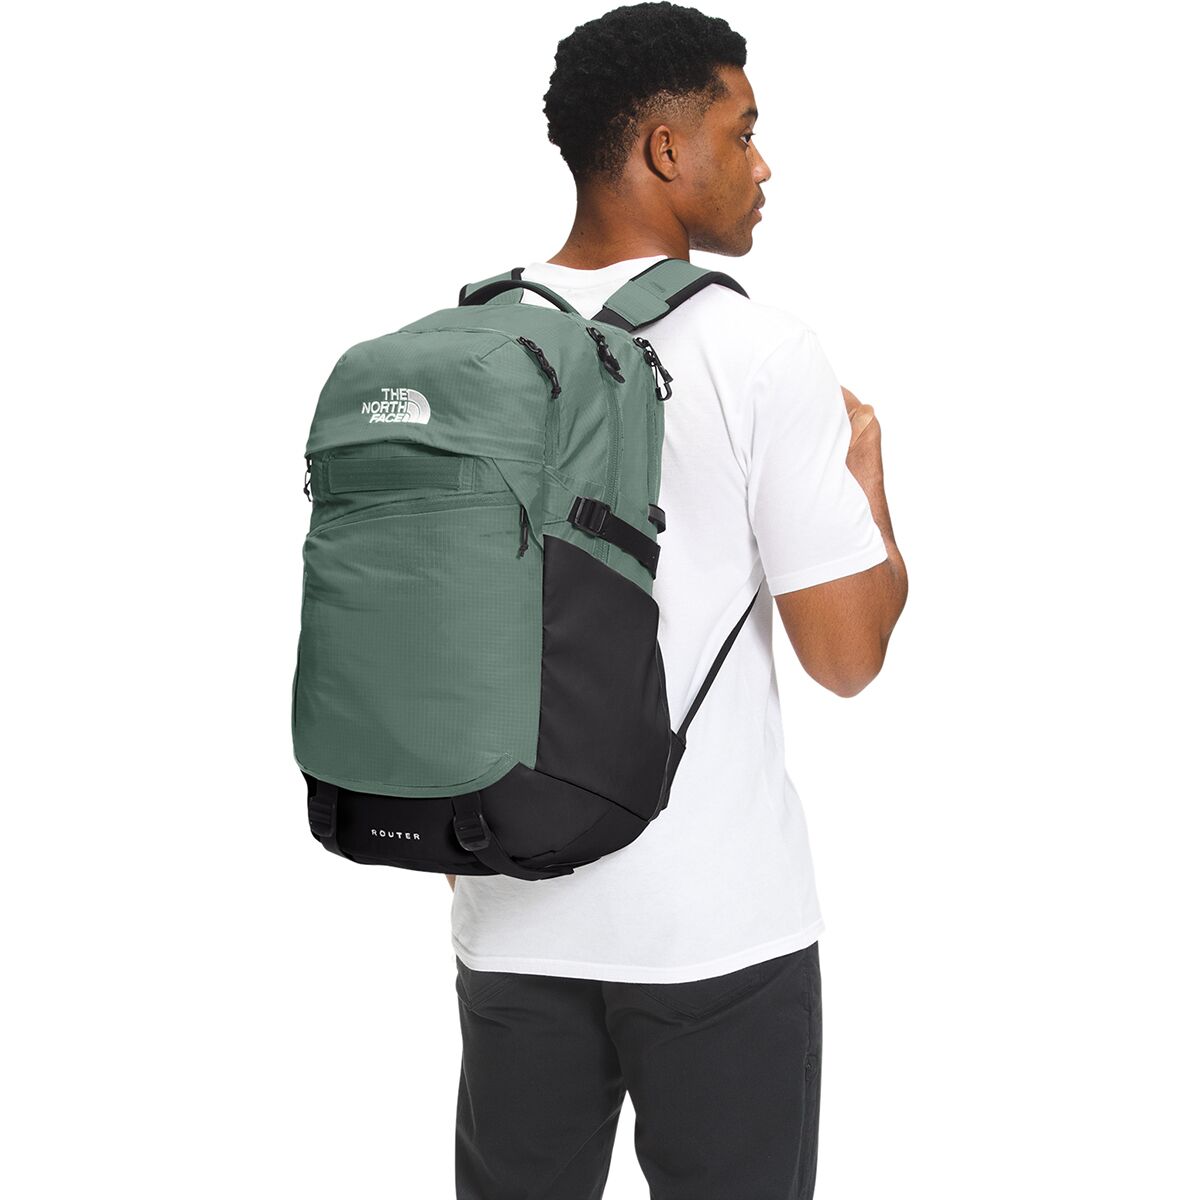 Mechanics recruit date The North Face Router 40L Backpack - Accessories